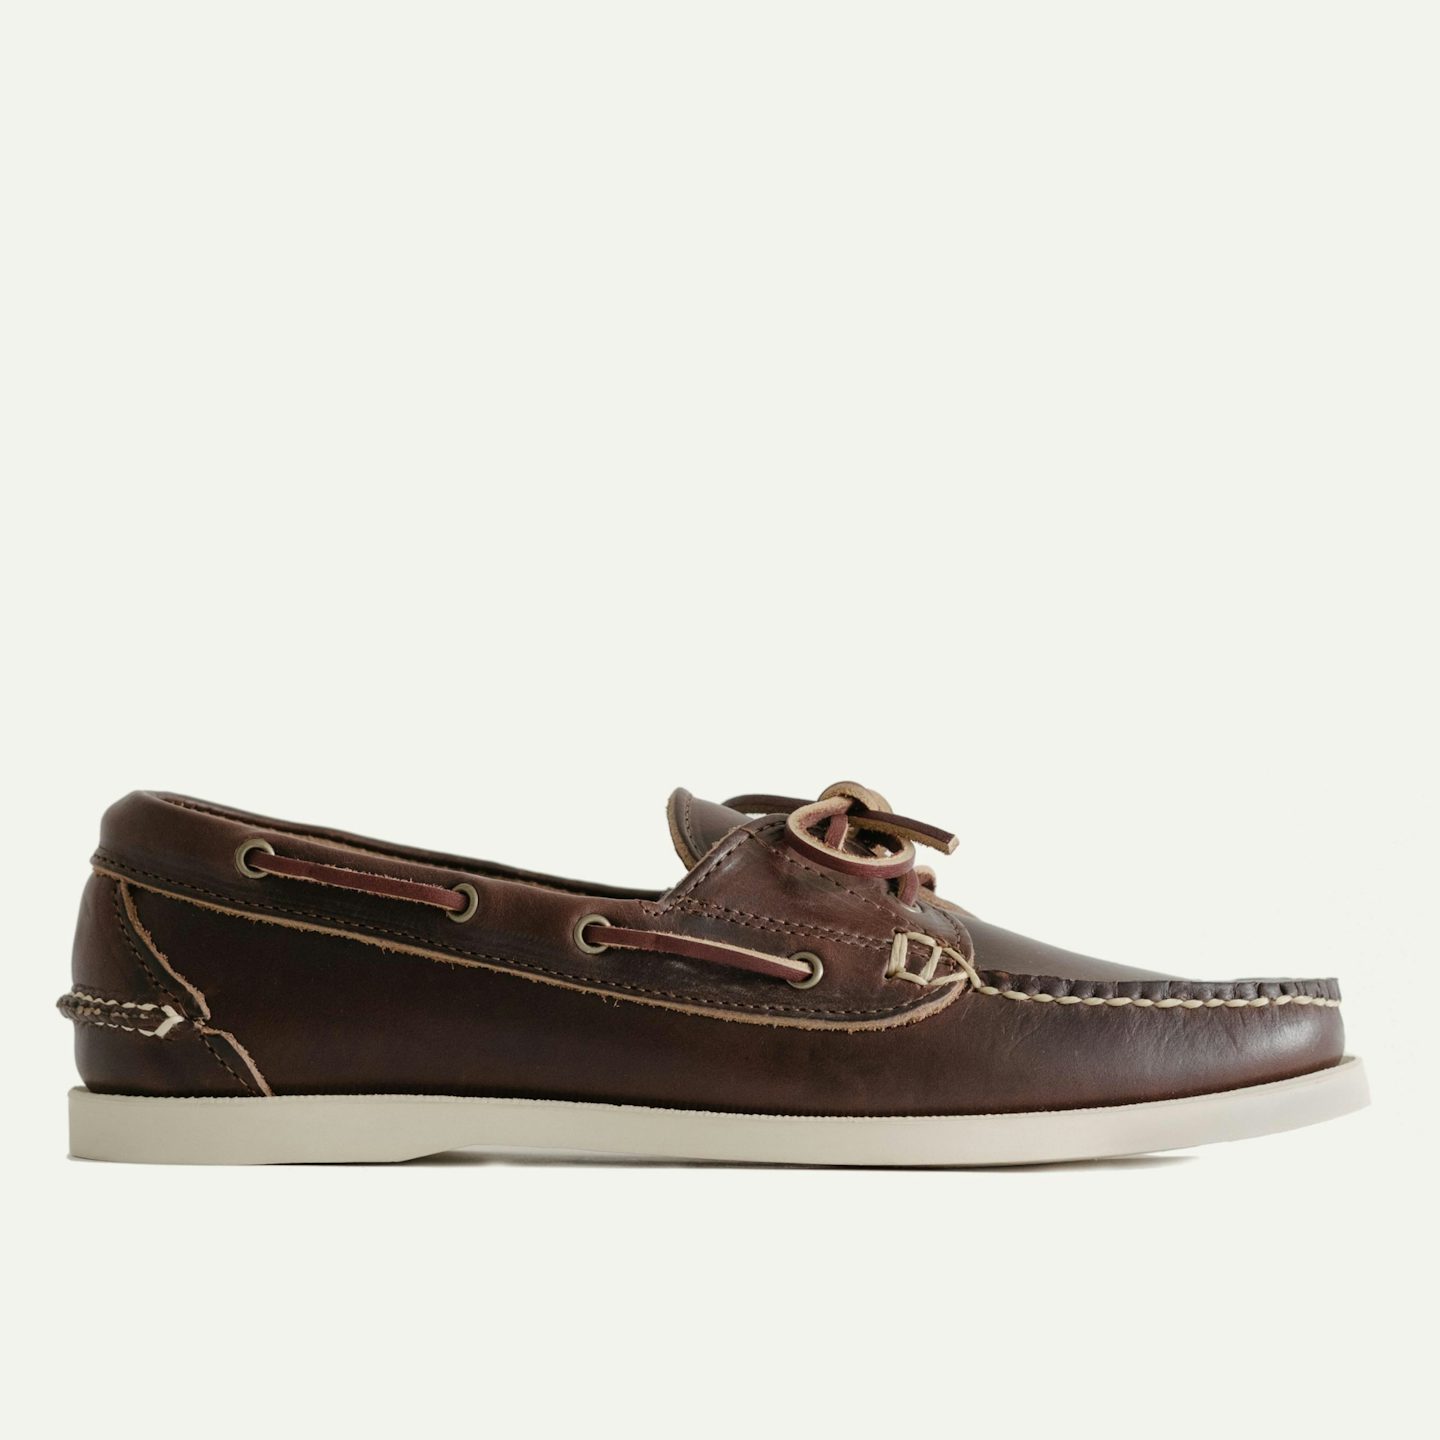 Brown Navy Blue DEK Men's Smooth and Nubuck Leather Casual Boat Shoes 